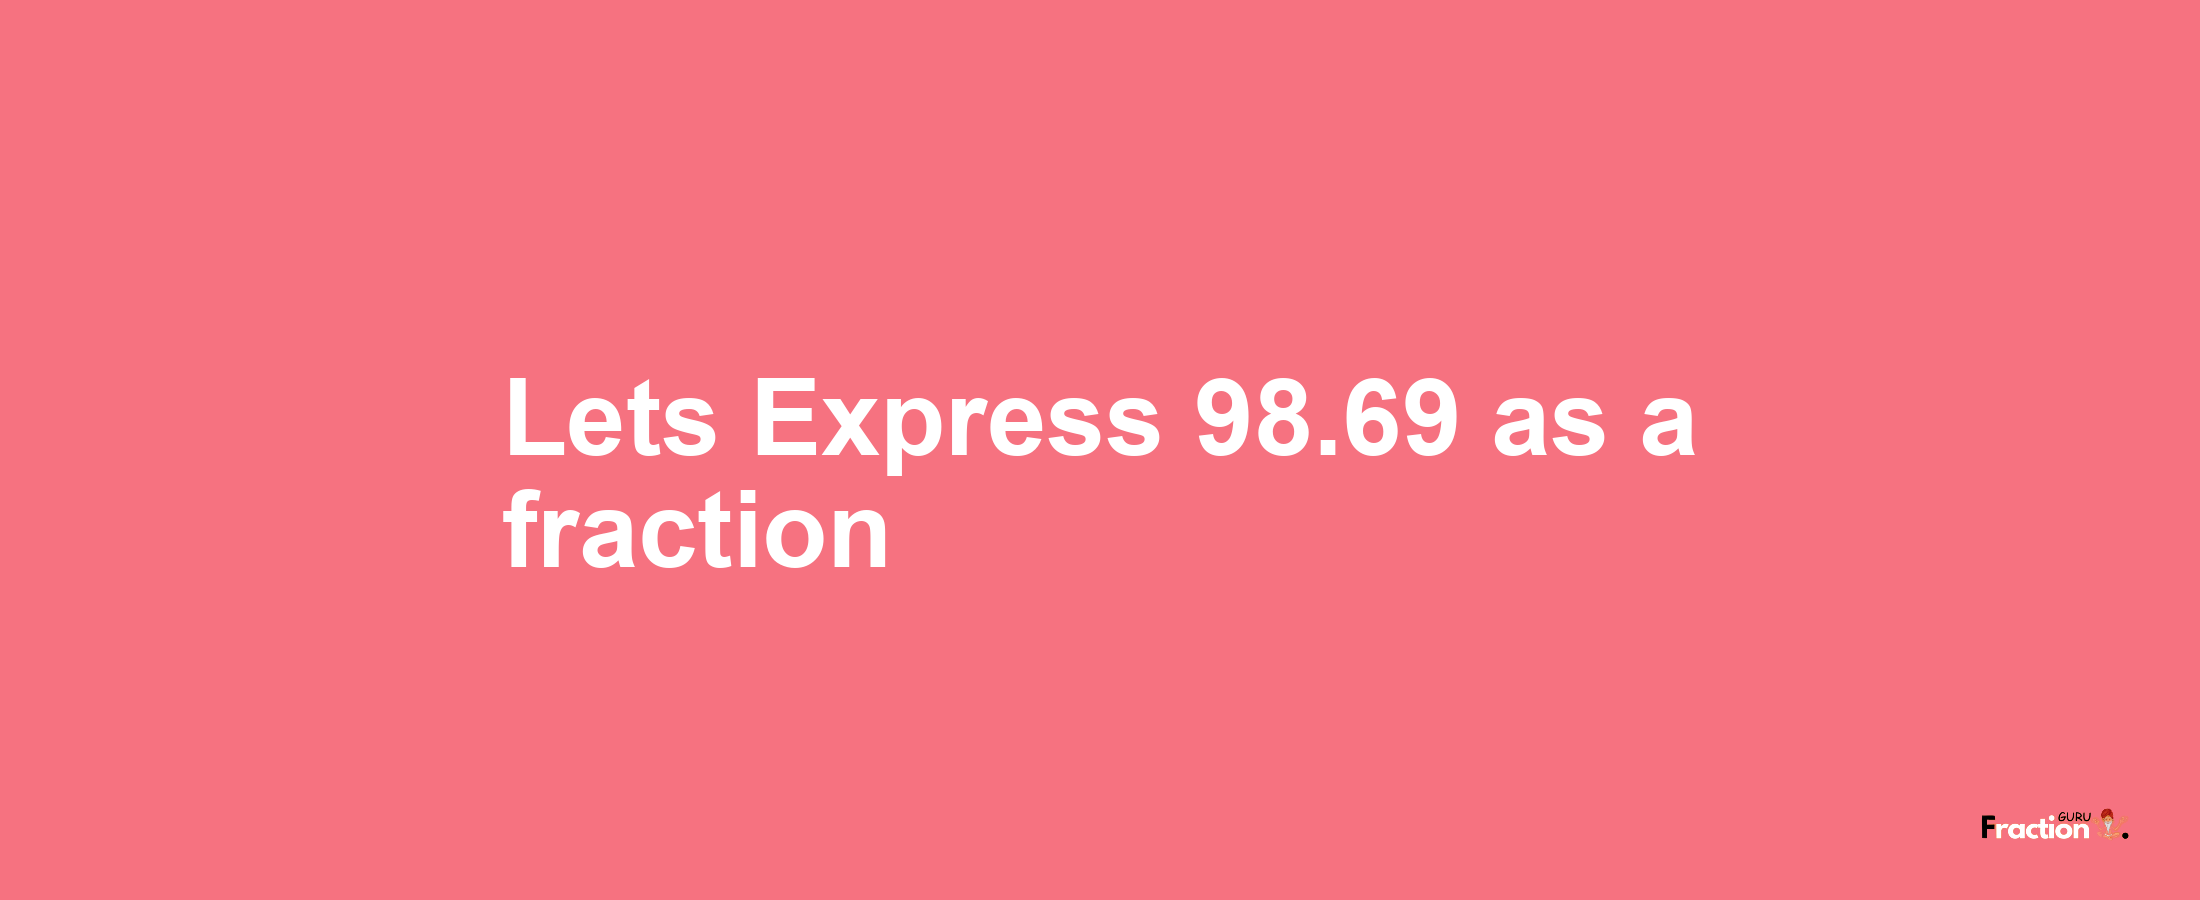 Lets Express 98.69 as afraction